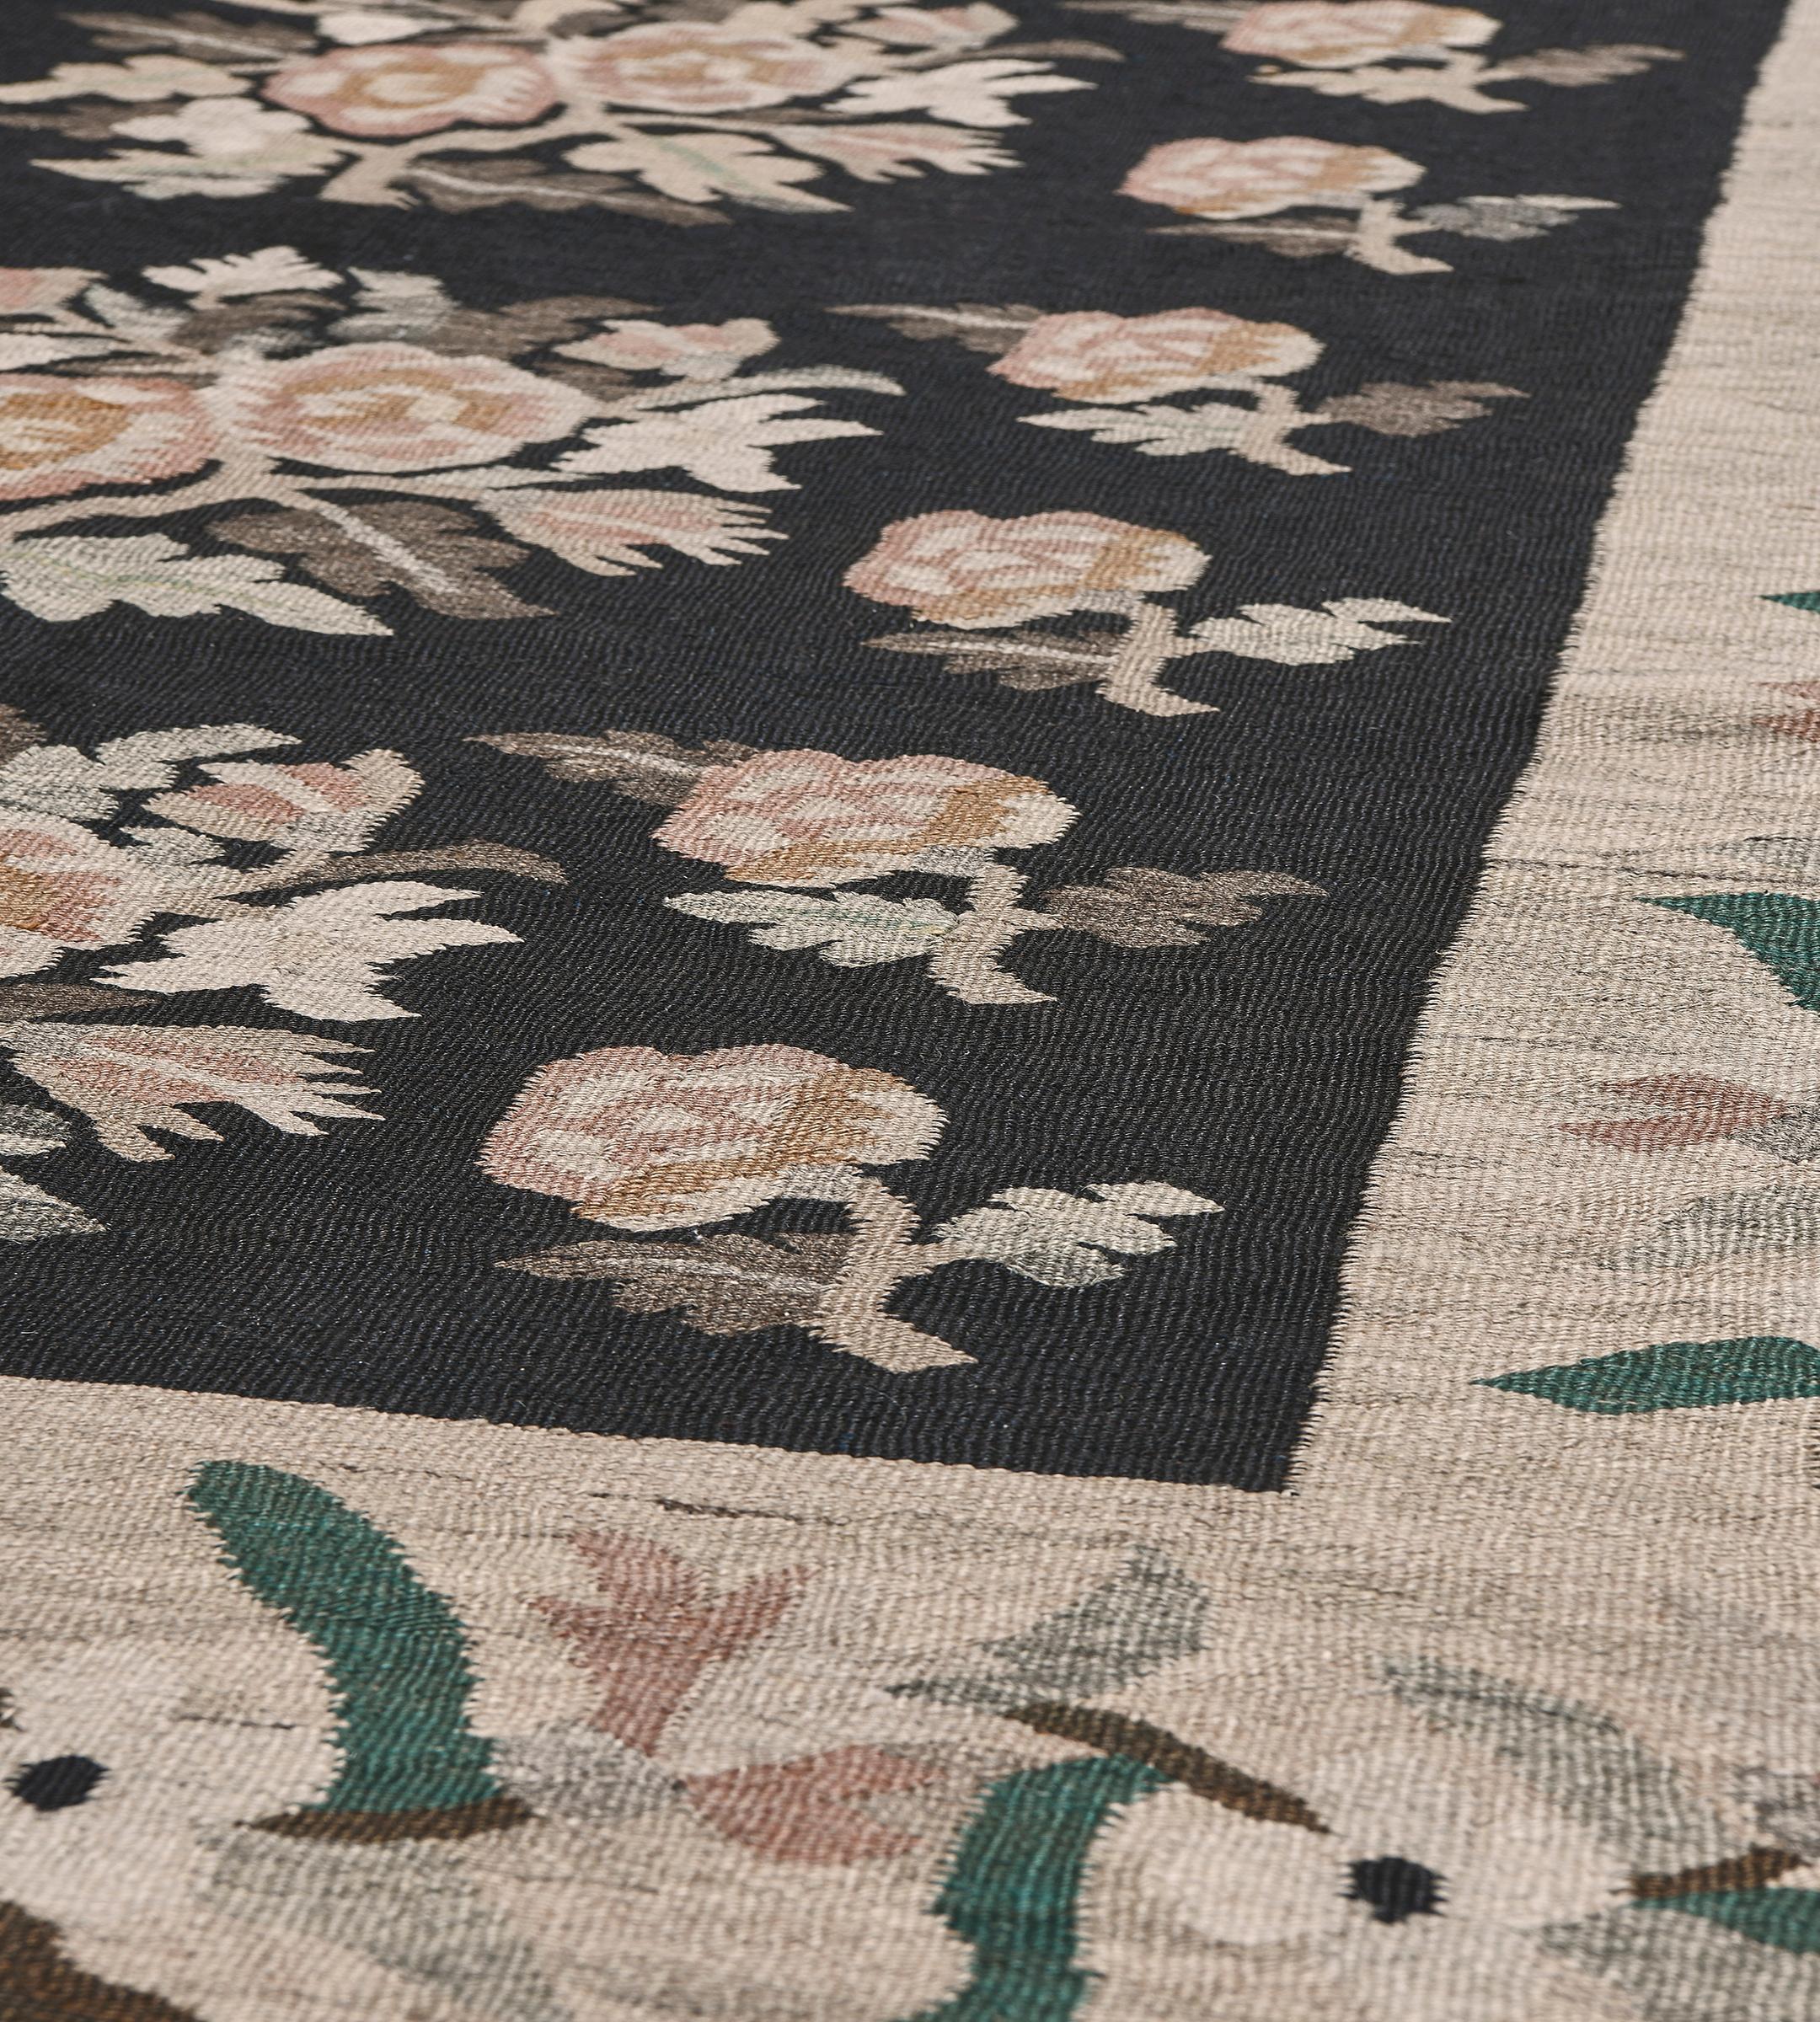 19th Century Antique Hand-woven Wool Floral Bessarabian Rug from Romania For Sale